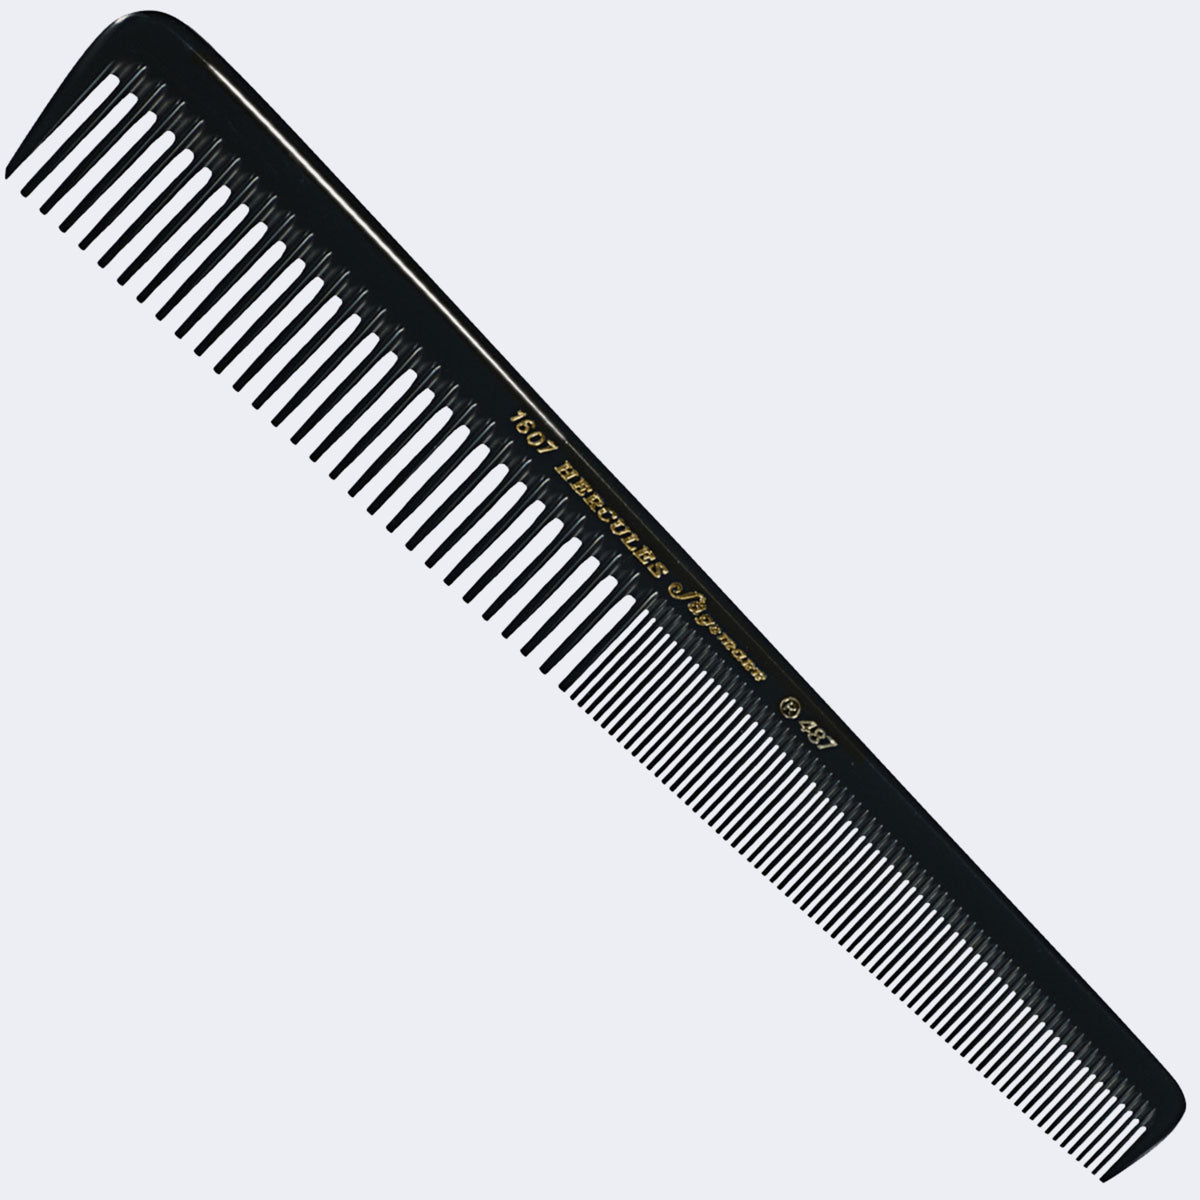 7-½” STYLING COMB FOR BARBER